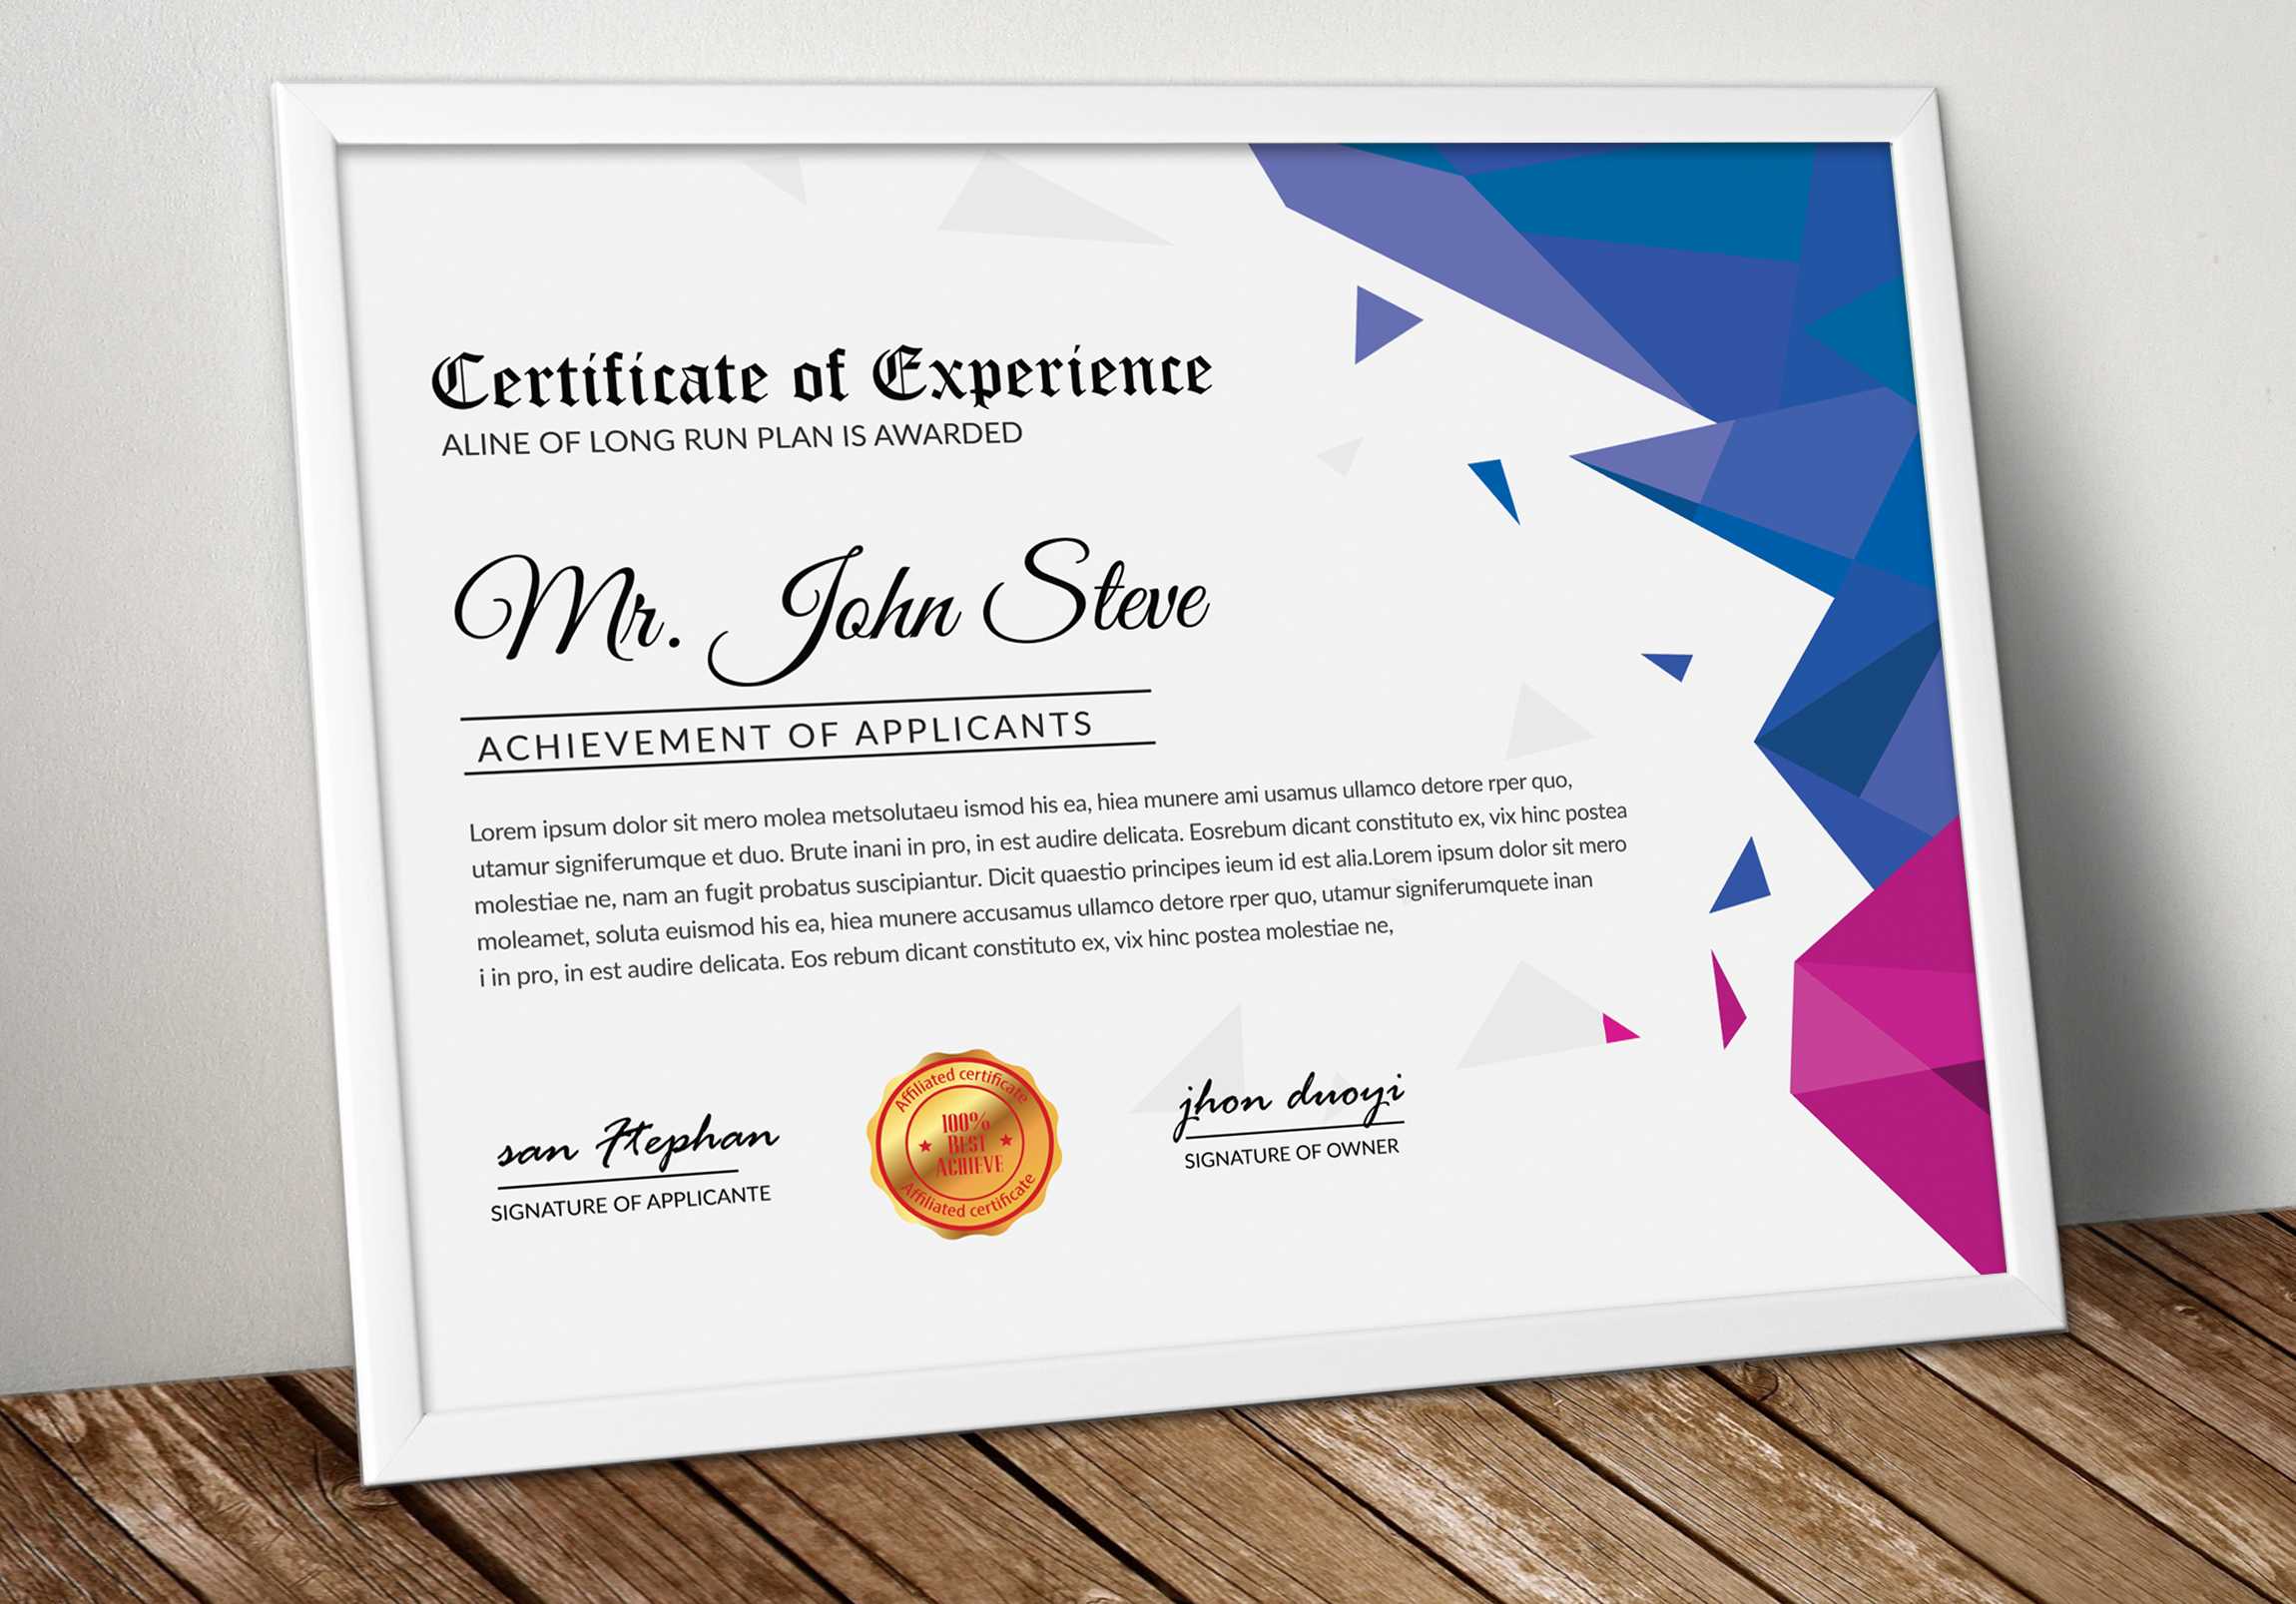 Microsoft Word Certificate Template – Vsual With Regard To Microsoft Word Certificate Templates